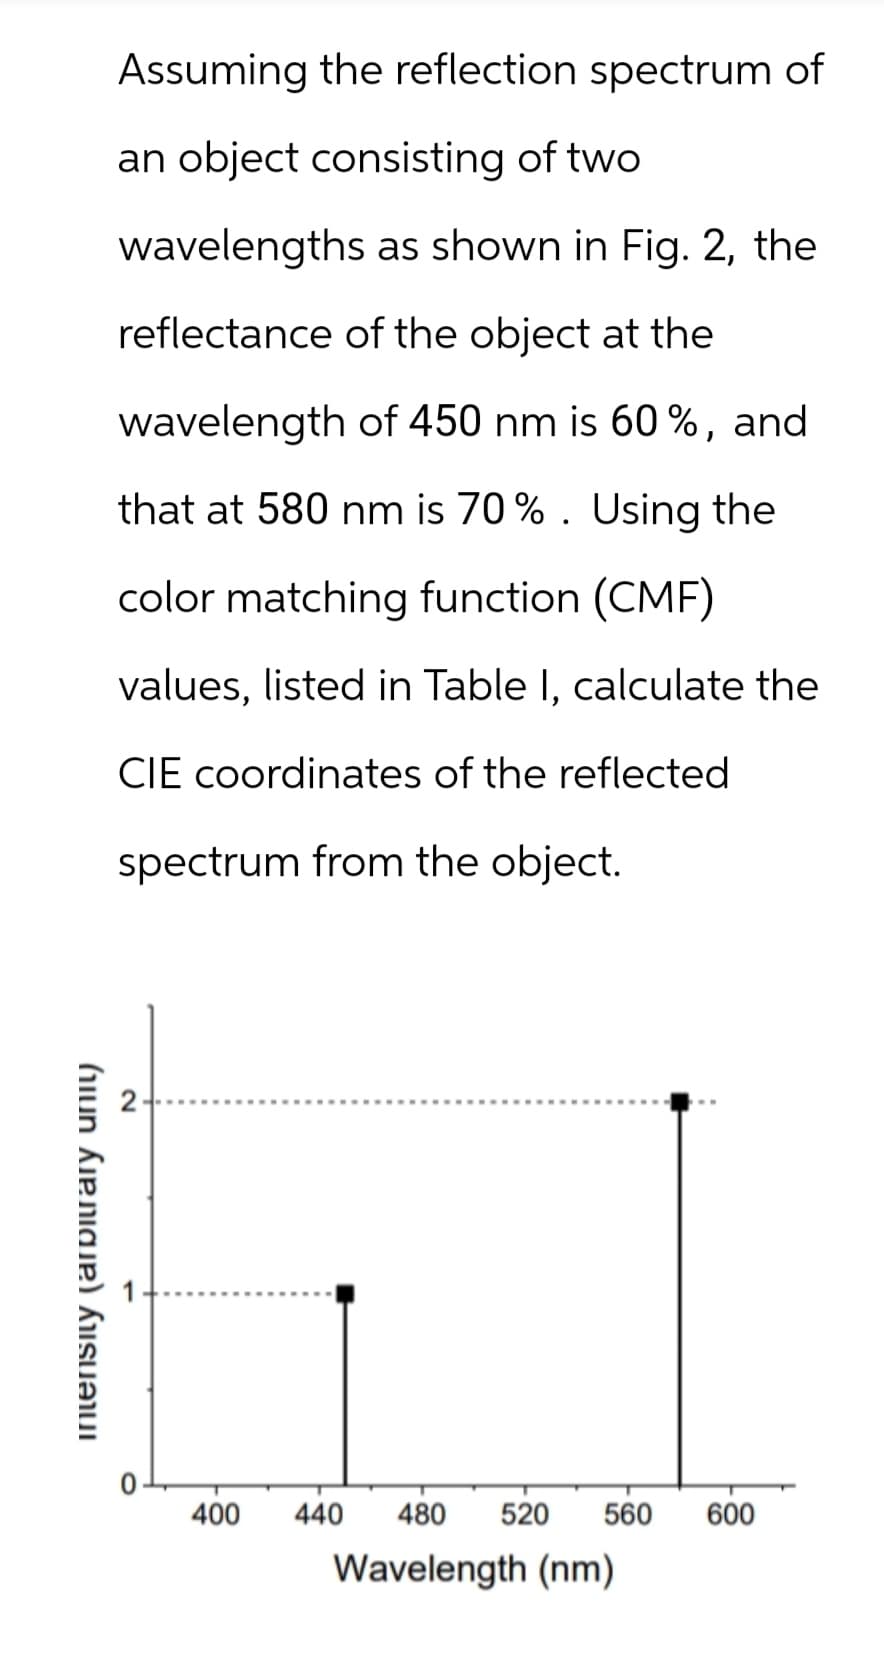 intensity (arbitrary unit)
Assuming the reflection spectrum of
an object consisting of two
wavelengths as shown in Fig. 2, the
reflectance of the object at the
wavelength of 450 nm is 60%, and
that at 580 nm is 70%. Using the
color matching function (CMF)
values, listed in Table I, calculate the
CIE coordinates of the reflected
spectrum from the object.
2
400
440
480
520 560
600
Wavelength (nm)